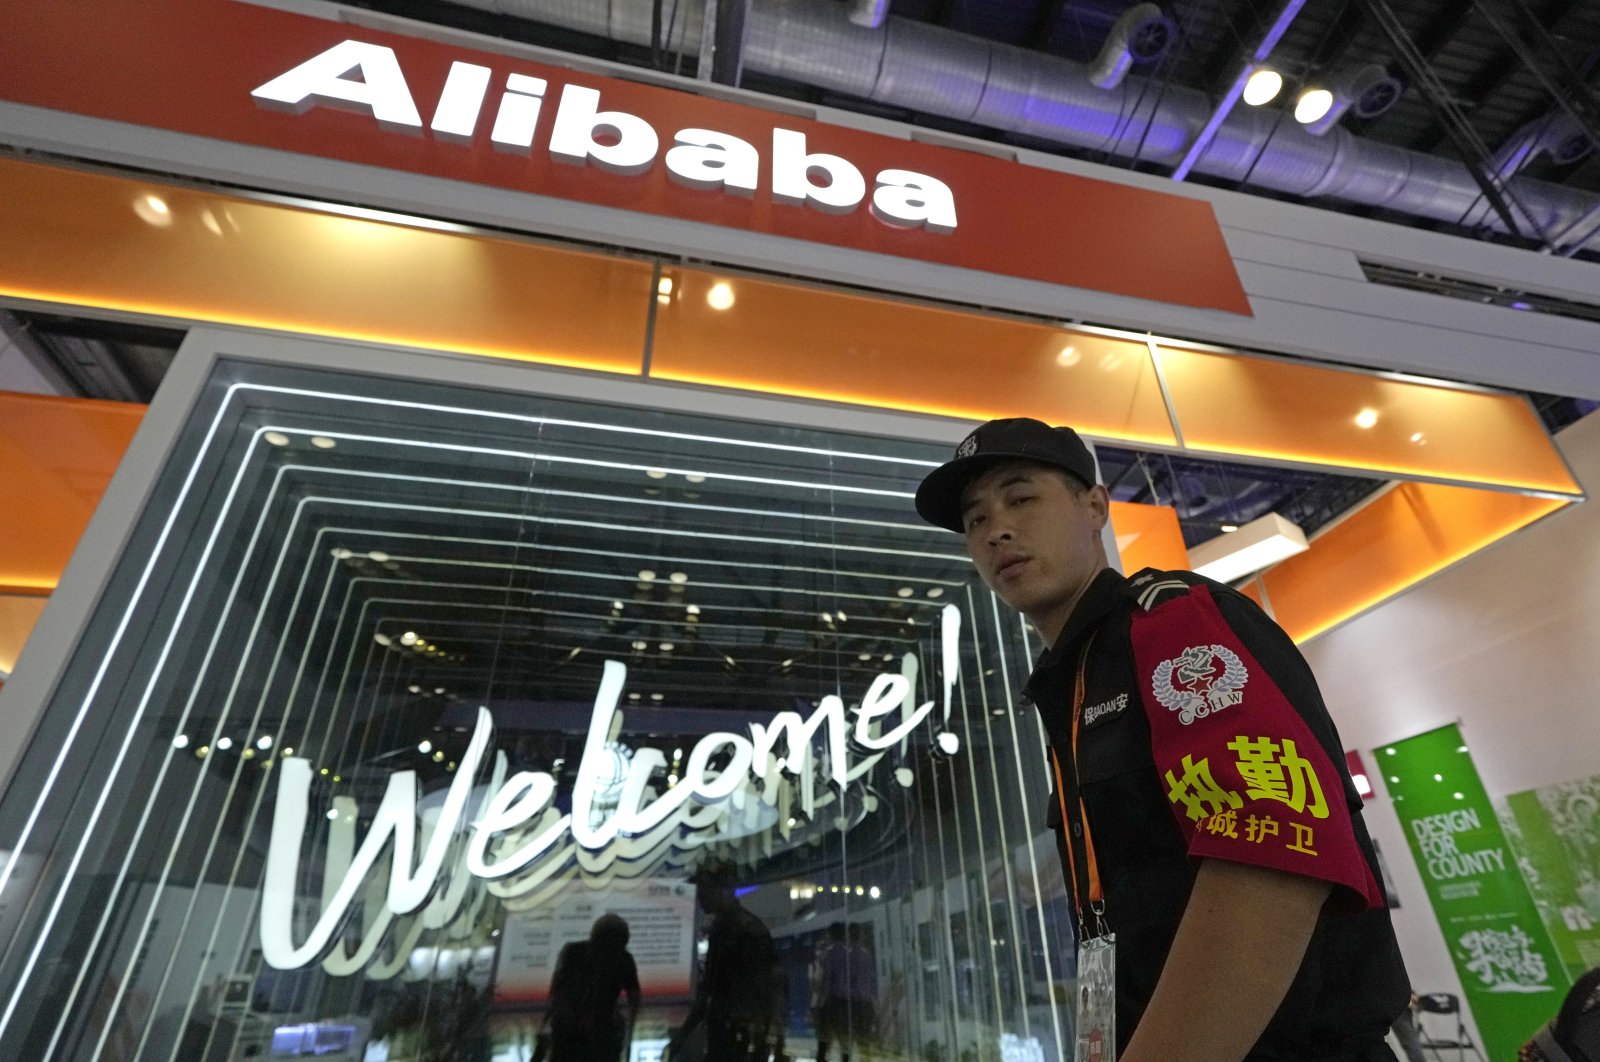 A security guard passes by the Alibaba booth at a trade show in Beijing, China, Sept. 7, 2021. (AP Photo)